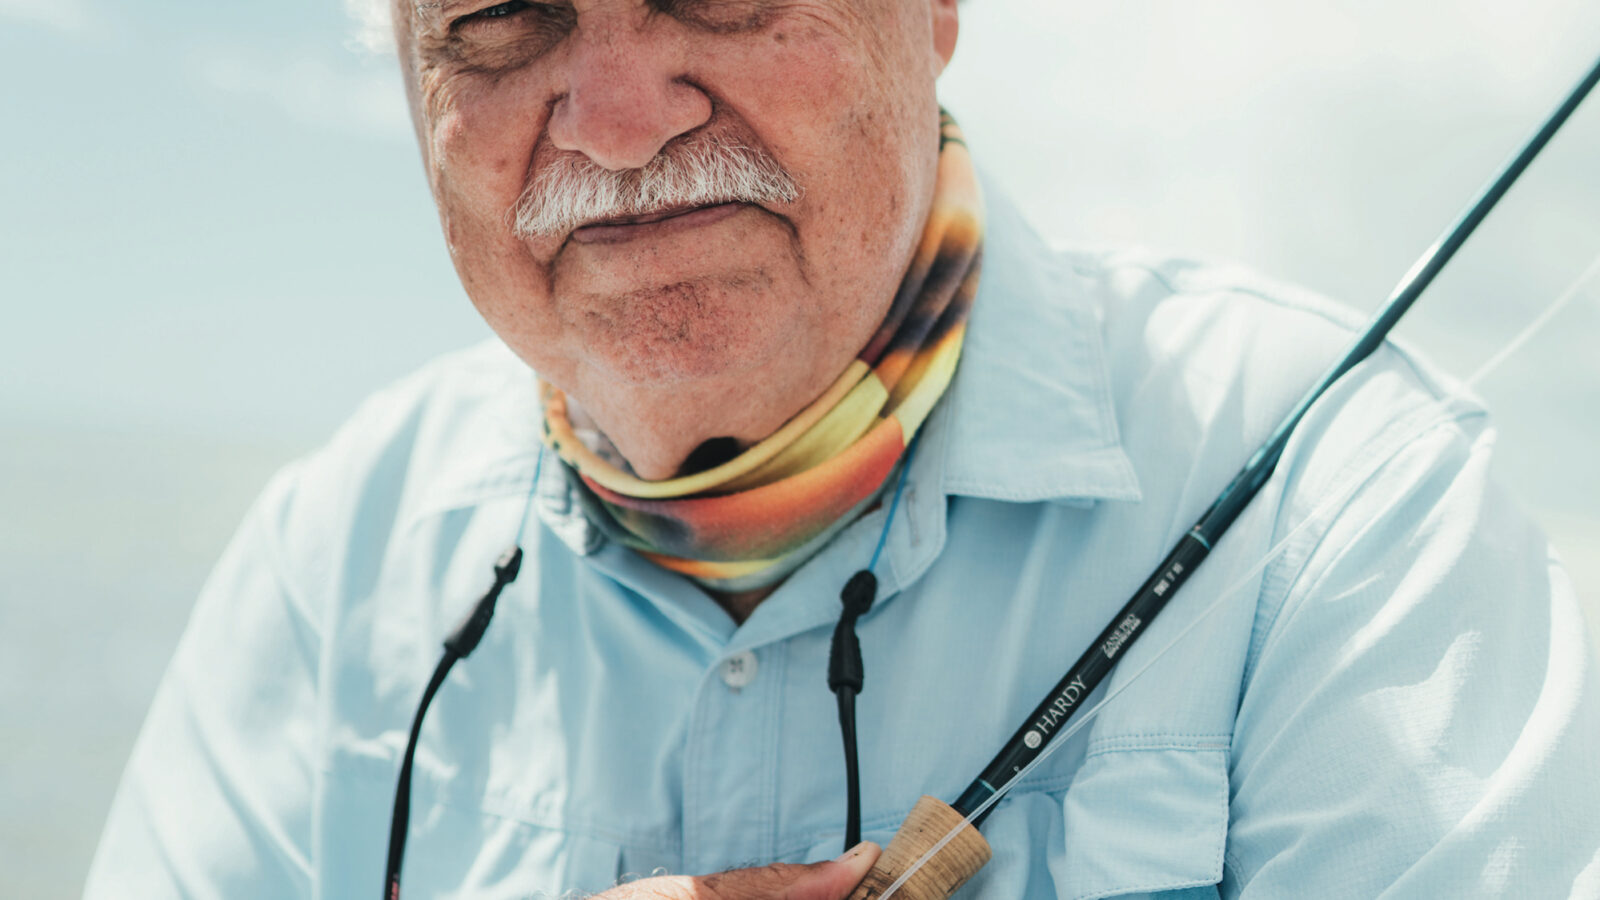 Chico Fernández gives the game fish in Florida’s Everglades National Park a brief break.